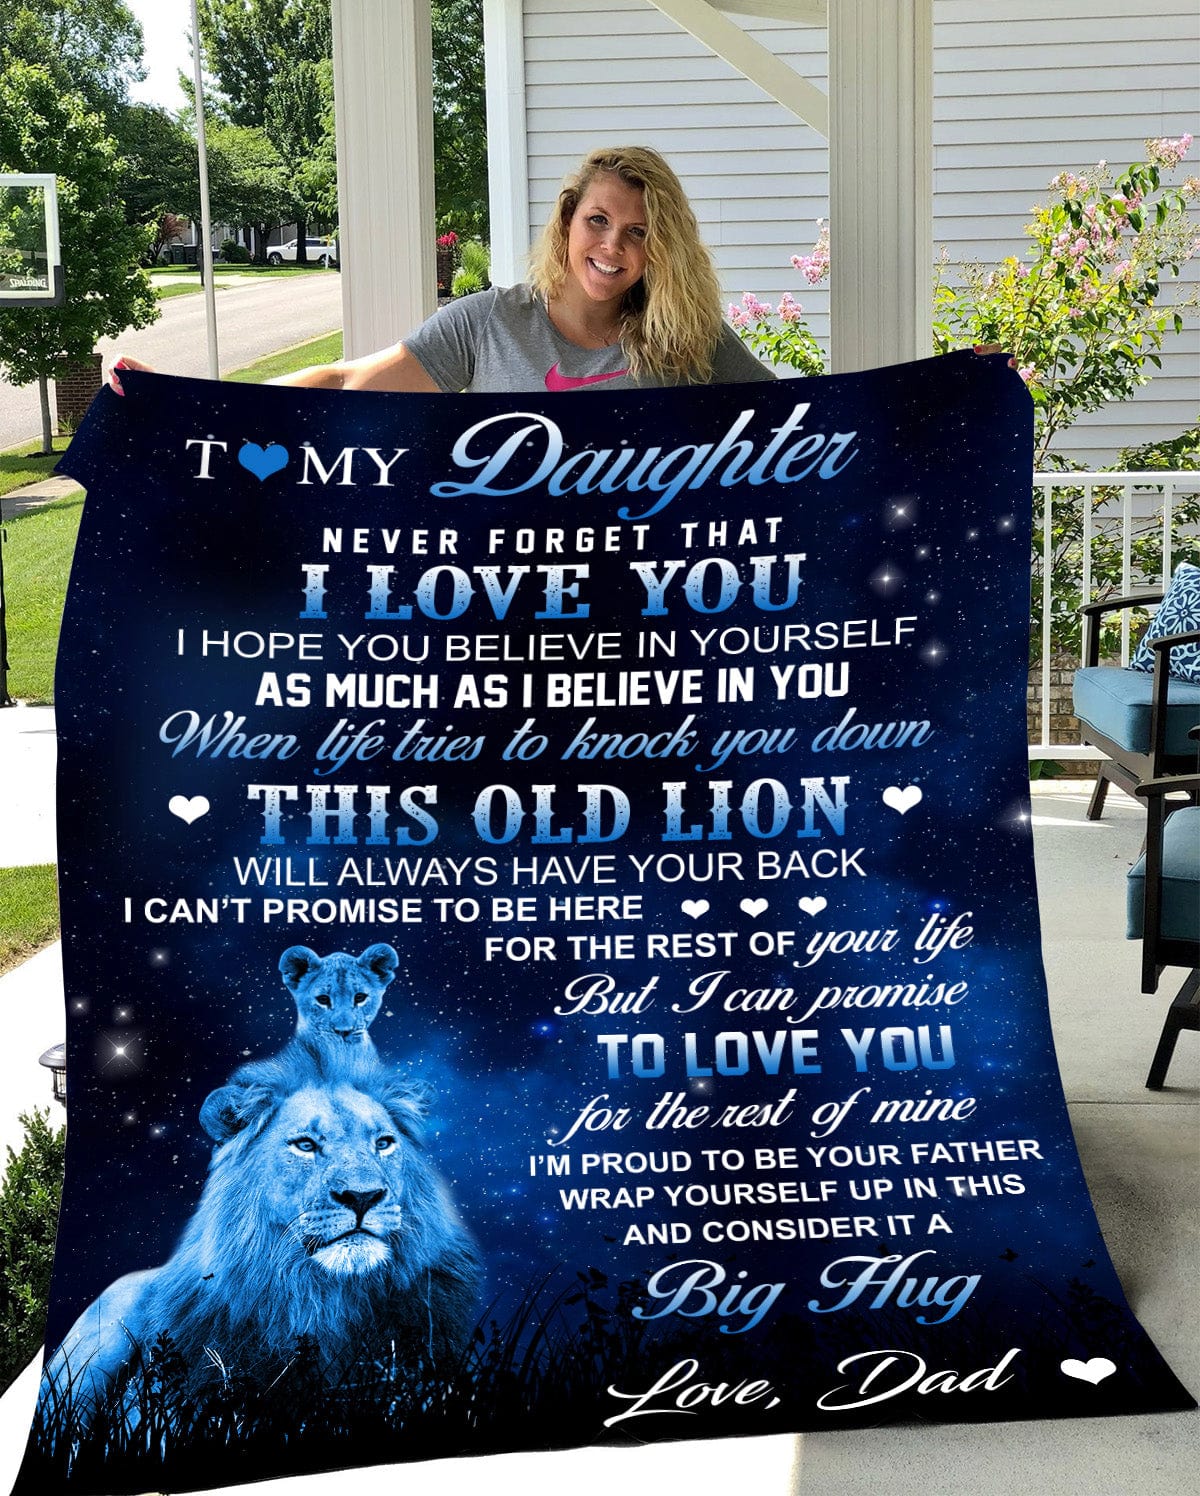 To my Daughter From Dad Blanket - This Old Lion